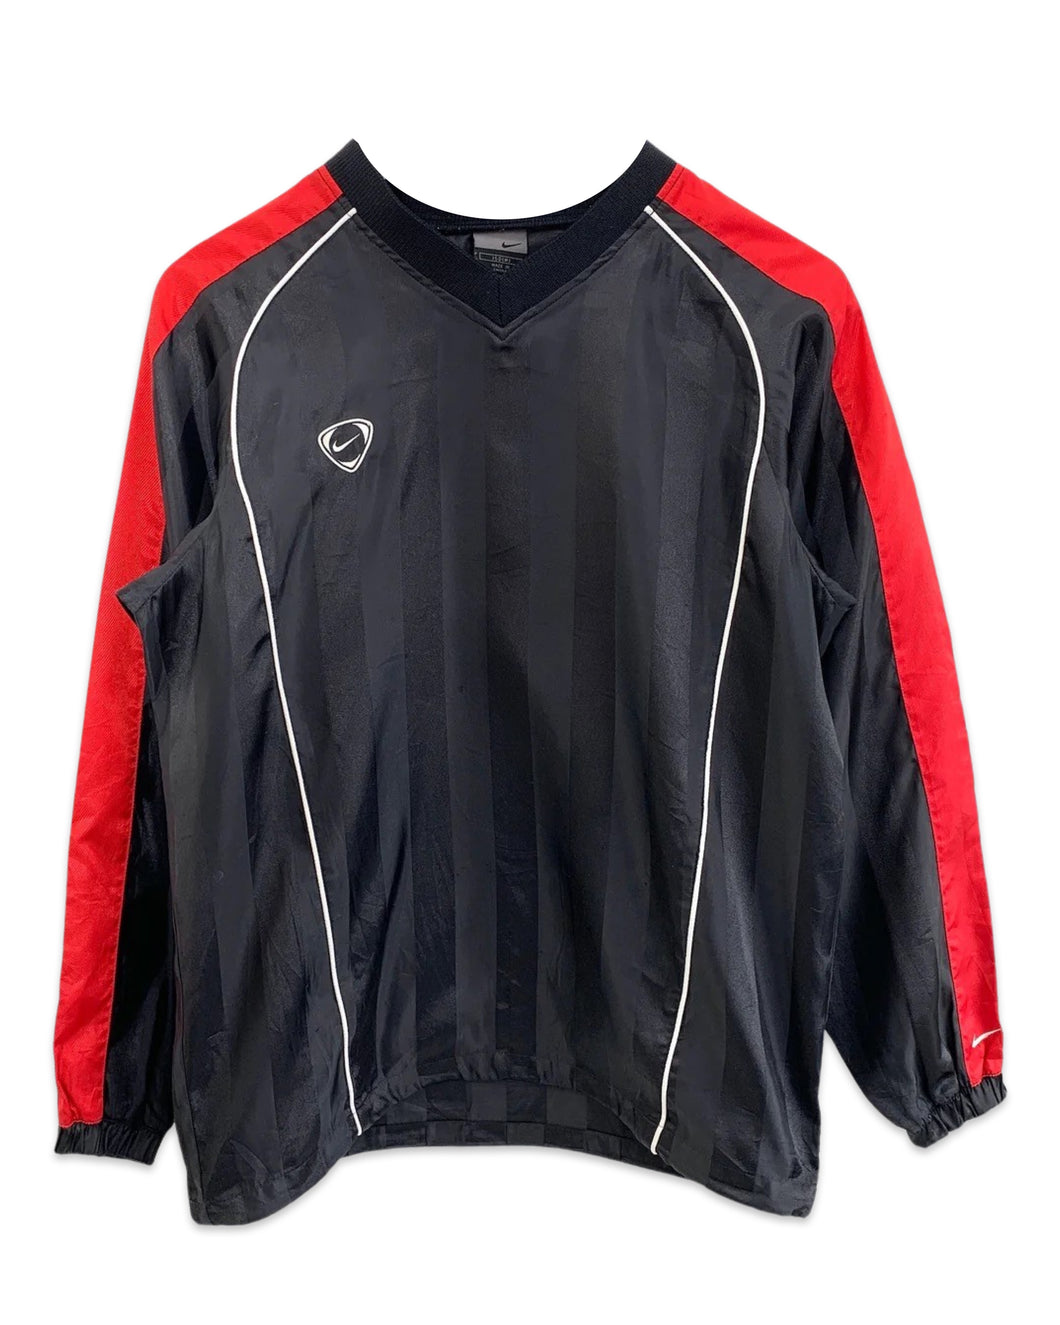 Nike Vintage Long Sleeve Football Jersey in Black and Red ⏐ Size S